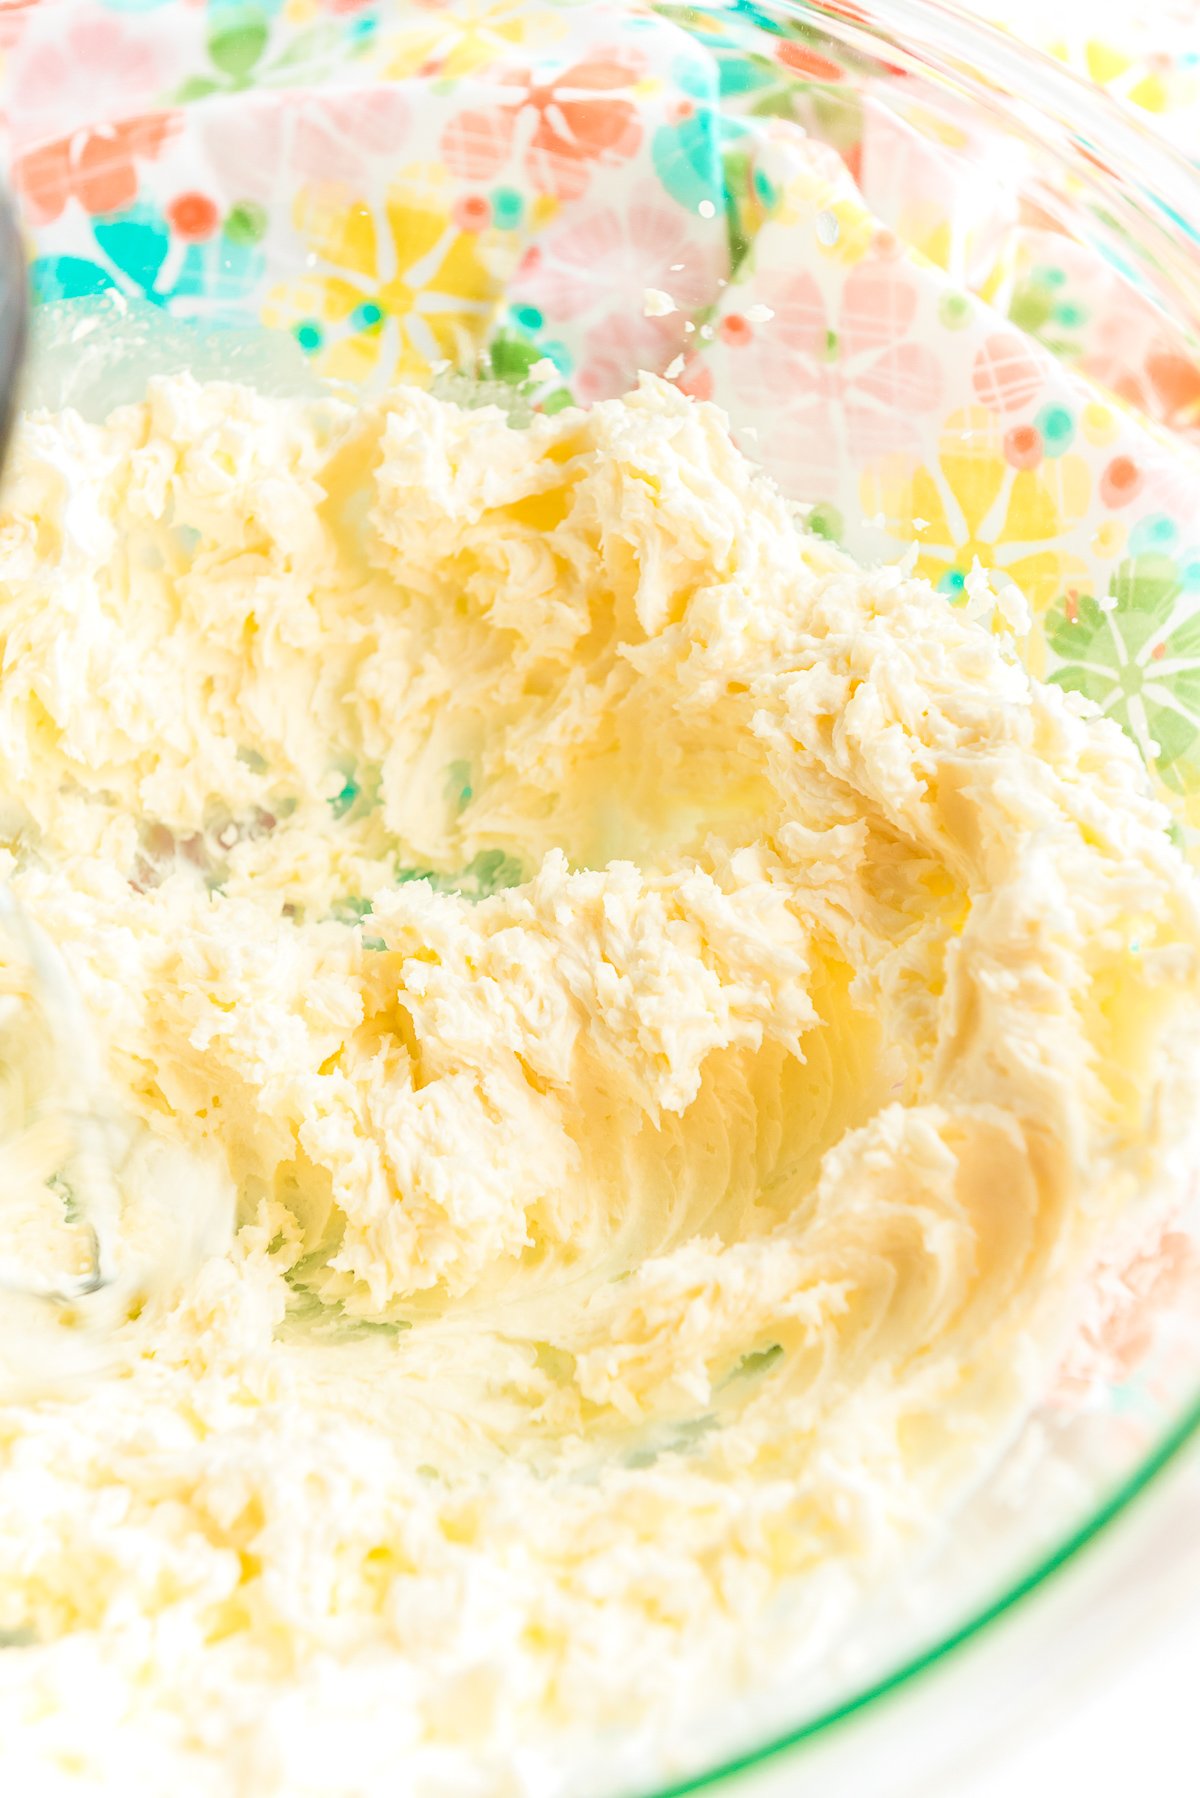 Mascarpone cheese, sugar, and vanilla has been whipped together in a glass mixing bowl.